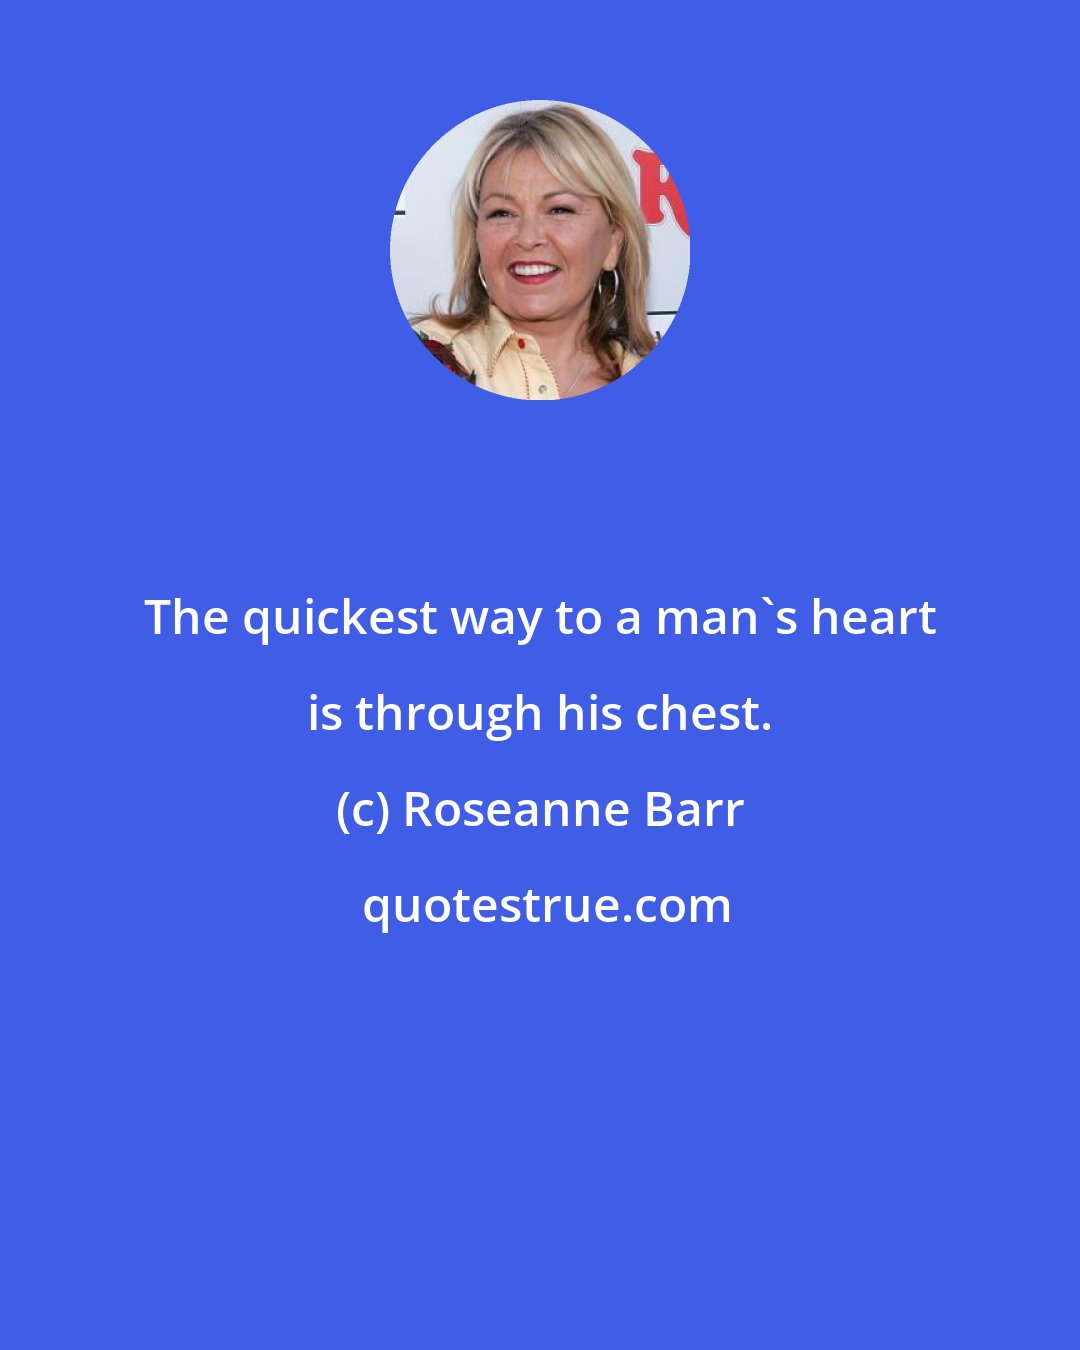 Roseanne Barr: The quickest way to a man's heart is through his chest.